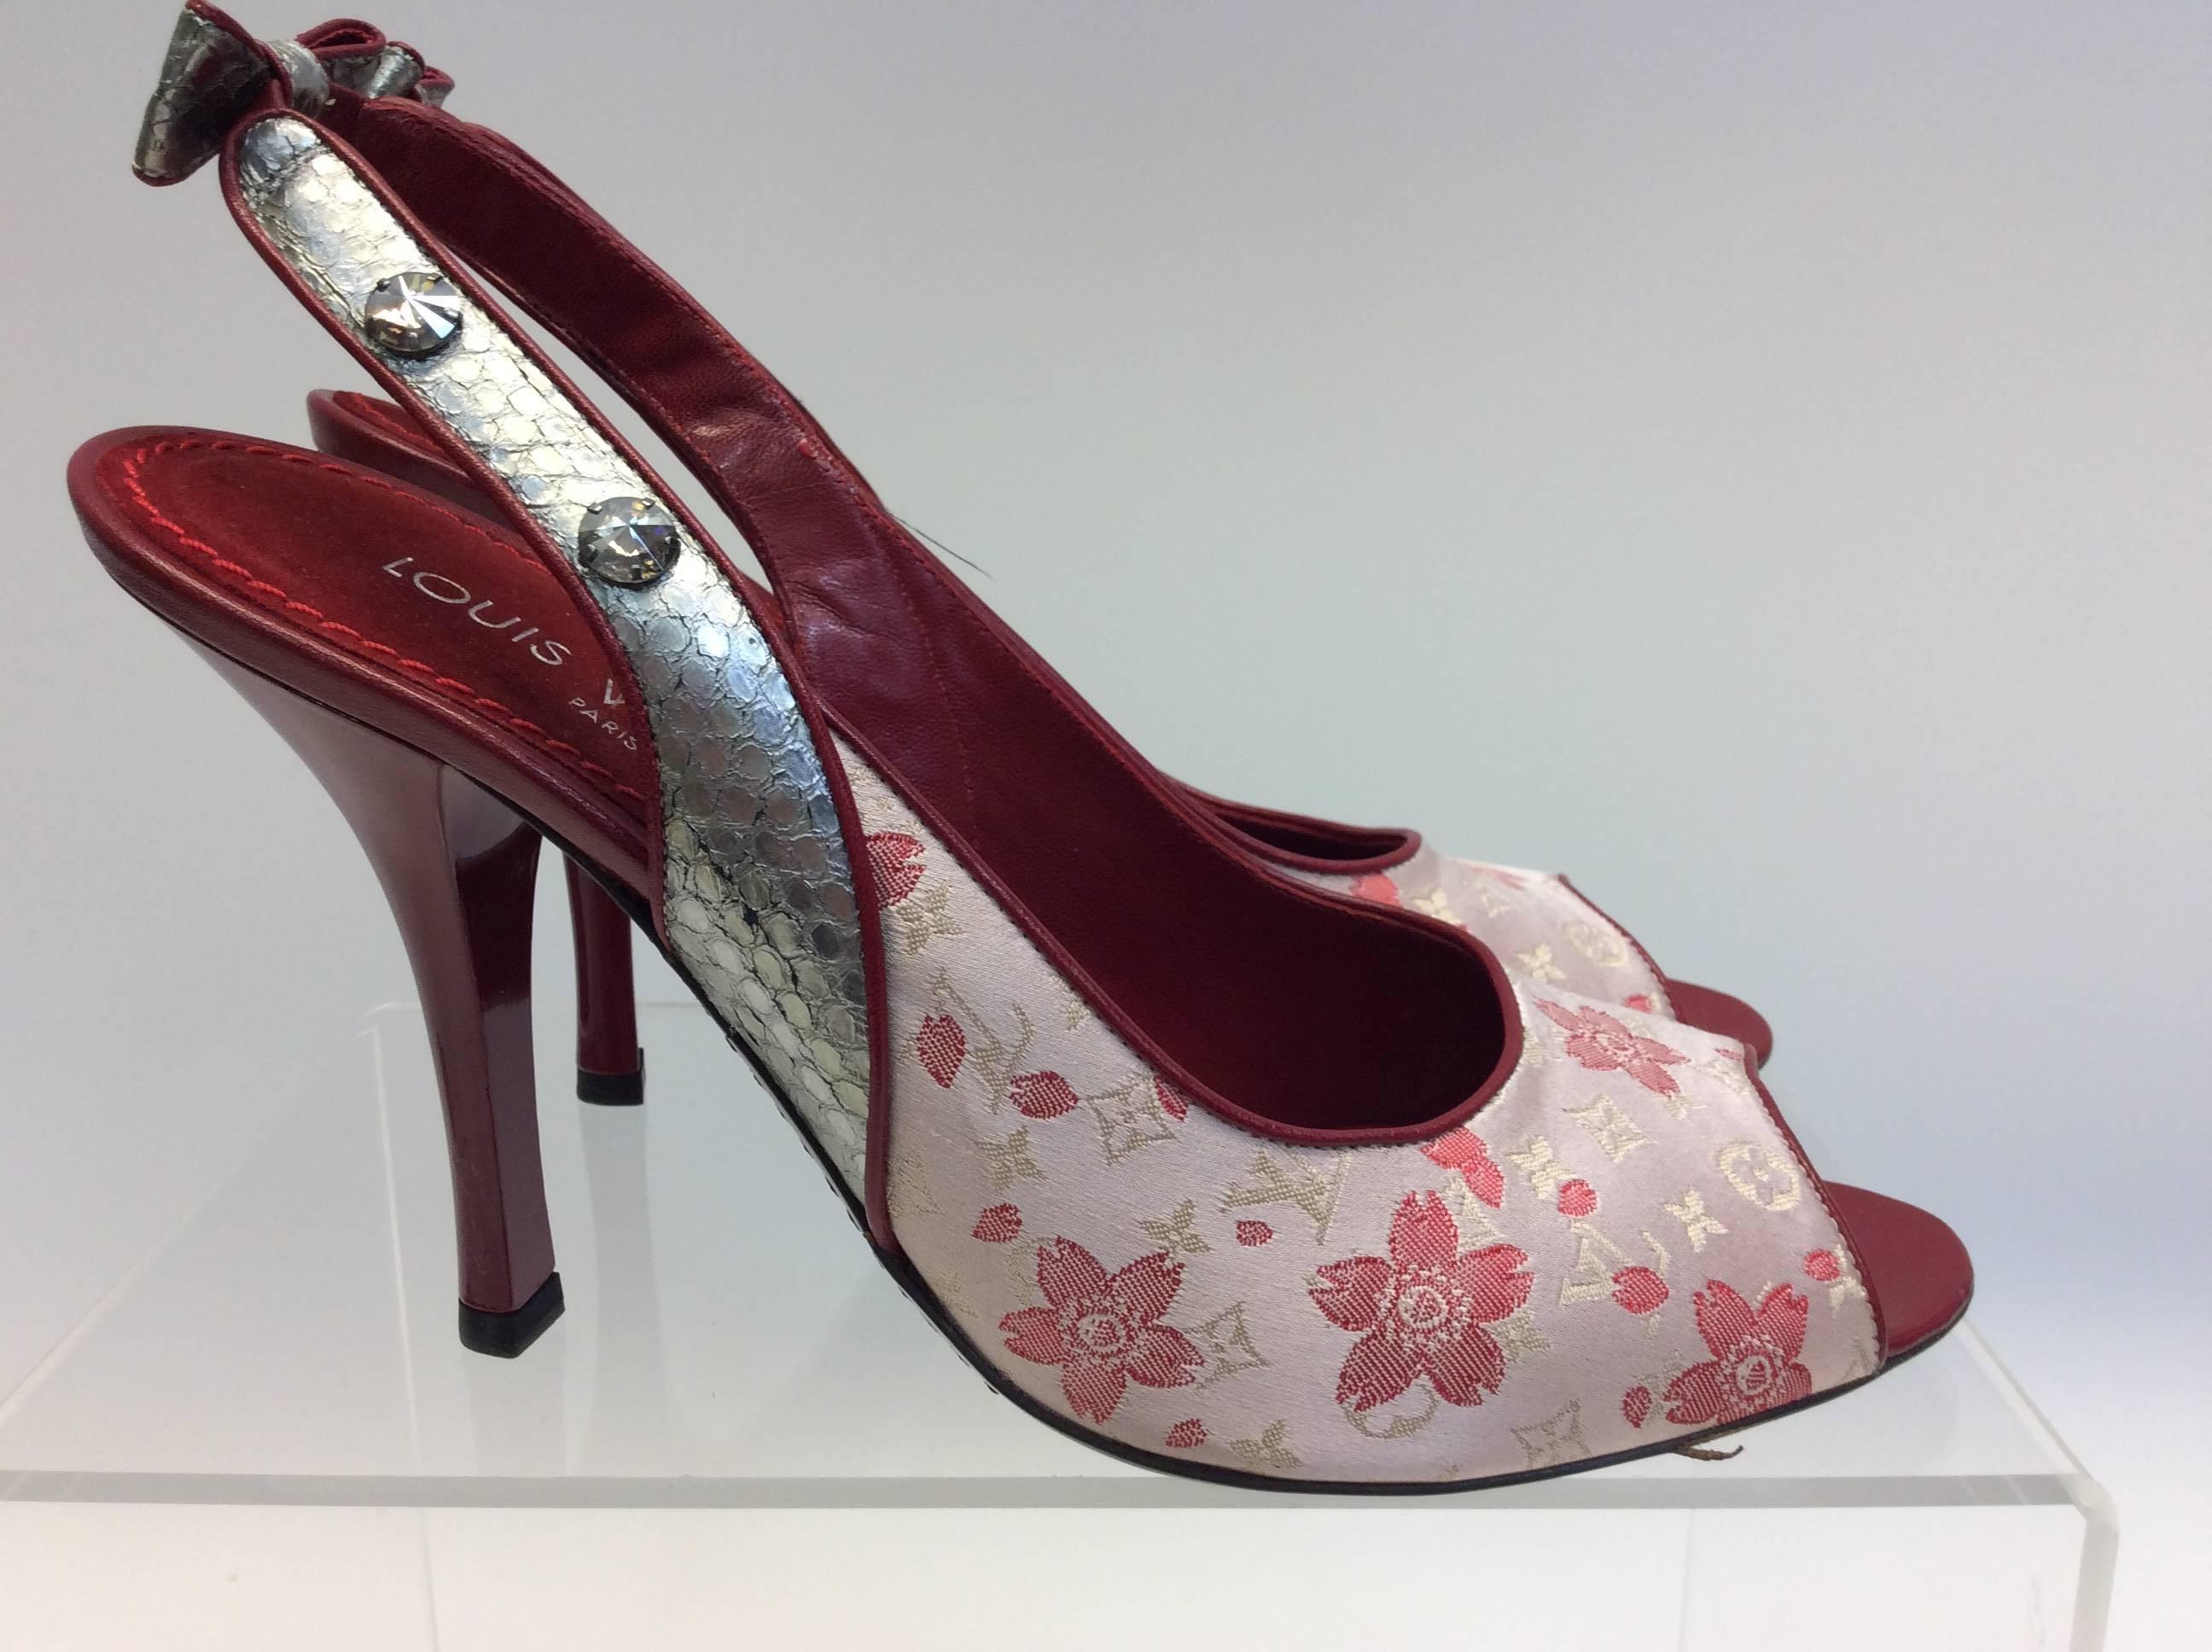 Louis Vuitton Red and Pink Floral Peep Toe Heel In Excellent Condition For Sale In Narberth, PA